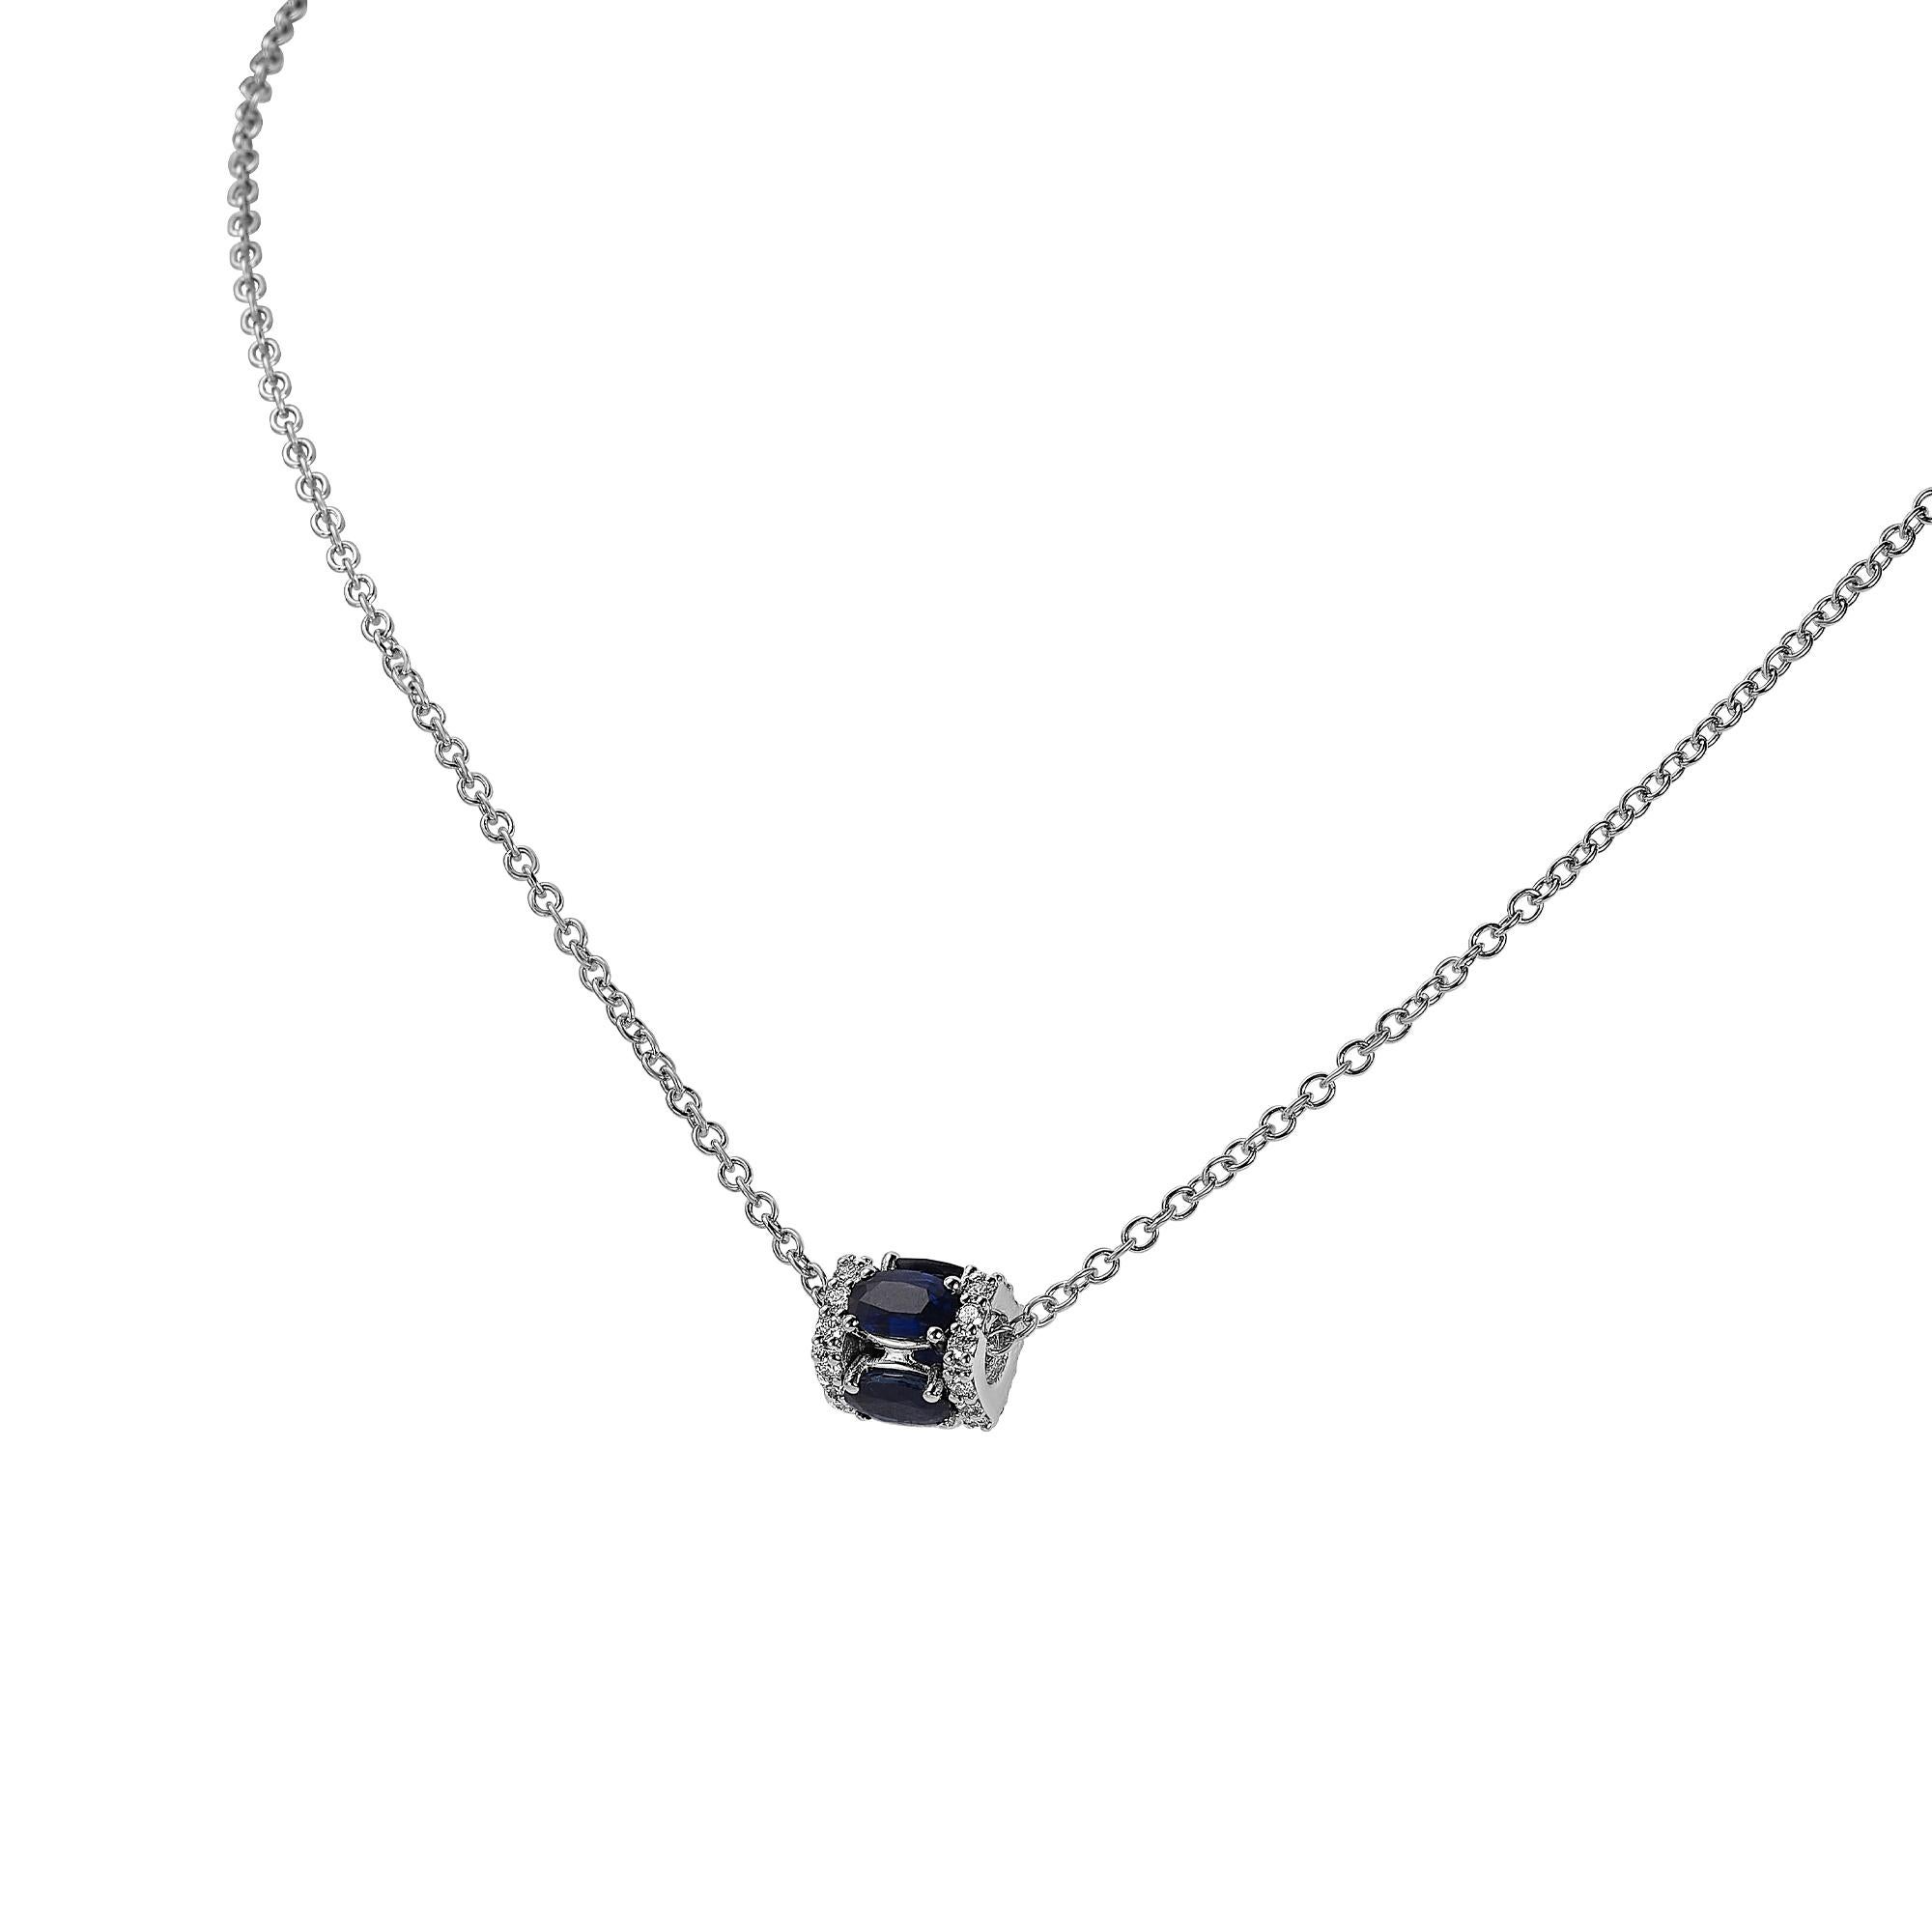 18K white gold, white diamond (approx. 0.38 carats), and blue sapphire (approx. 2.61 carats) pendant necklace